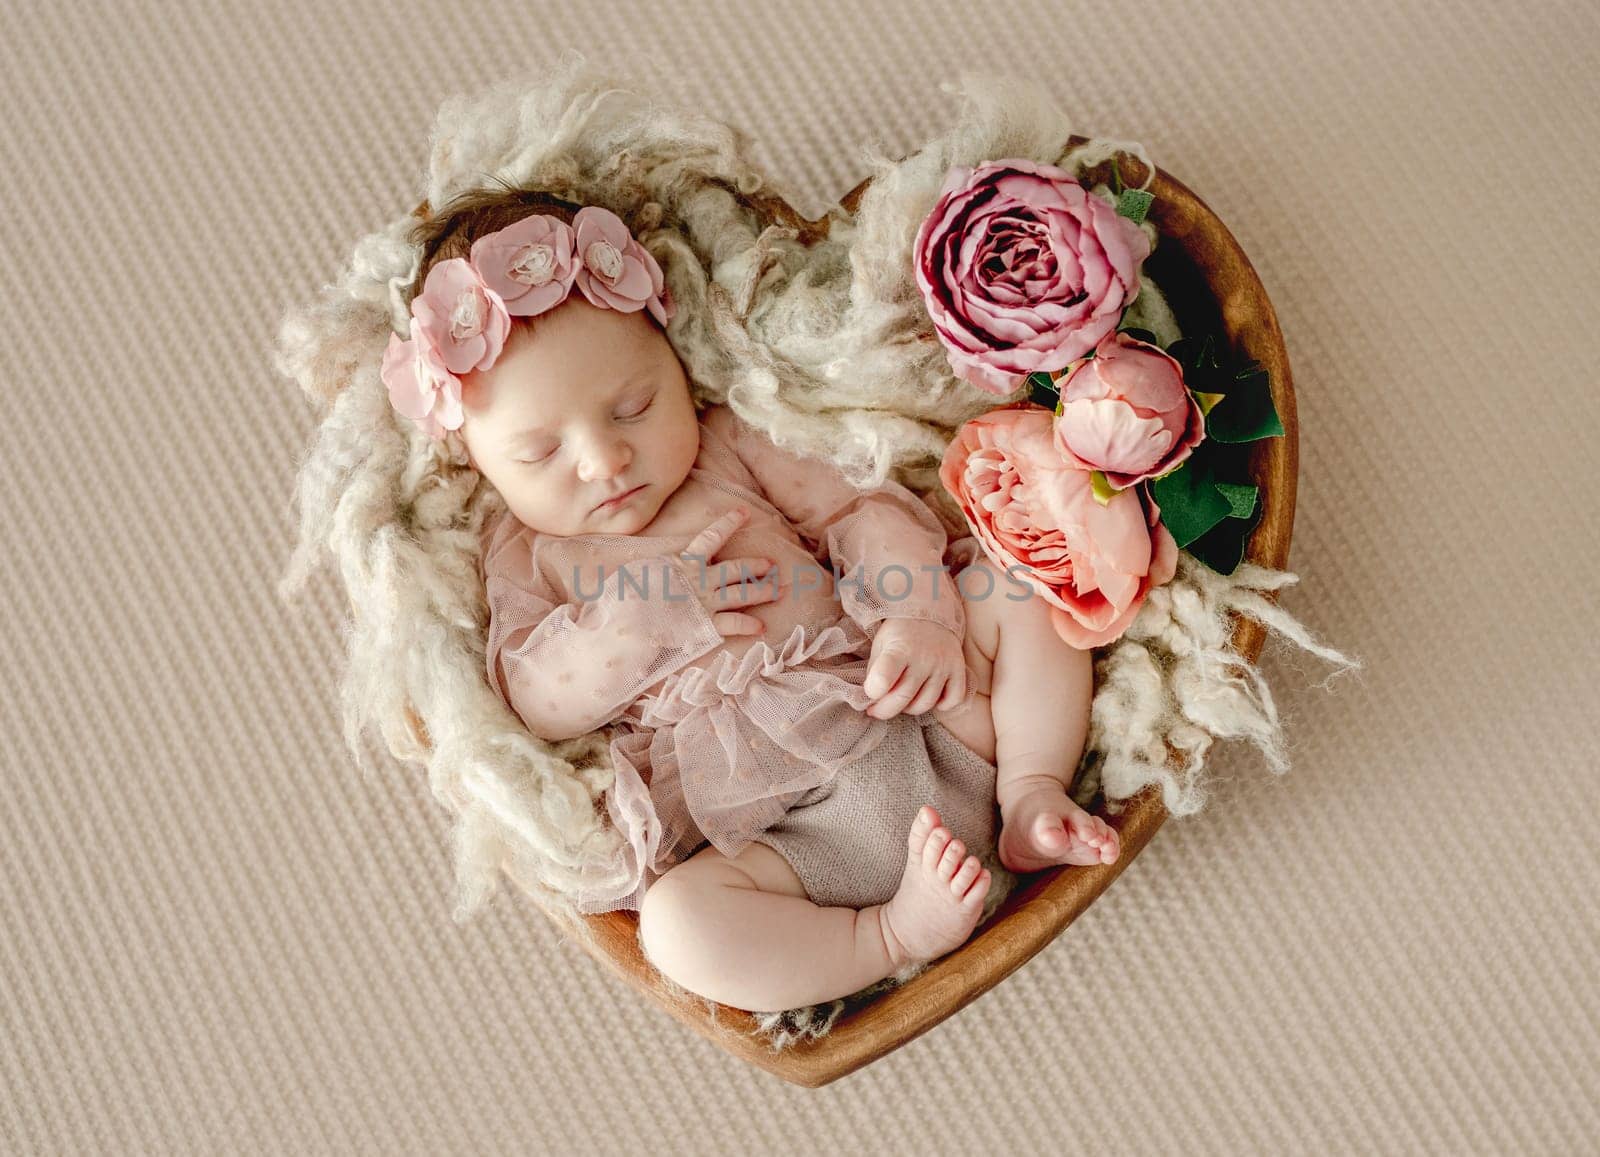 Newborn baby girl wearing dress sleeping in heart shape basket with toy. Cute infant child kid in wreath napping on fur